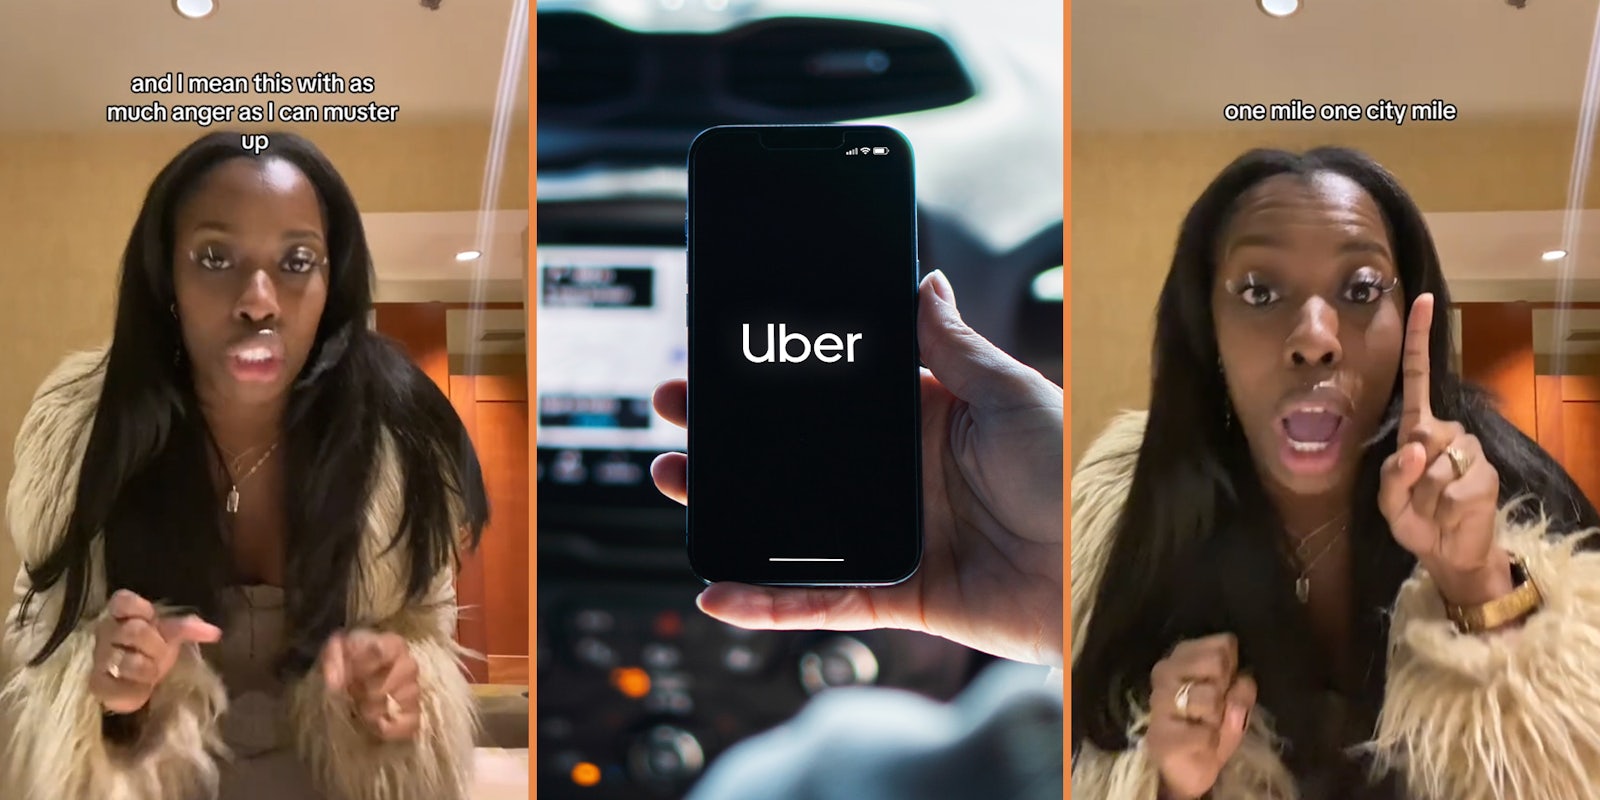 Woman slams Uber after 1-mile ride was listed for $52, she checked back 12 minutes later and was shocked at newer price